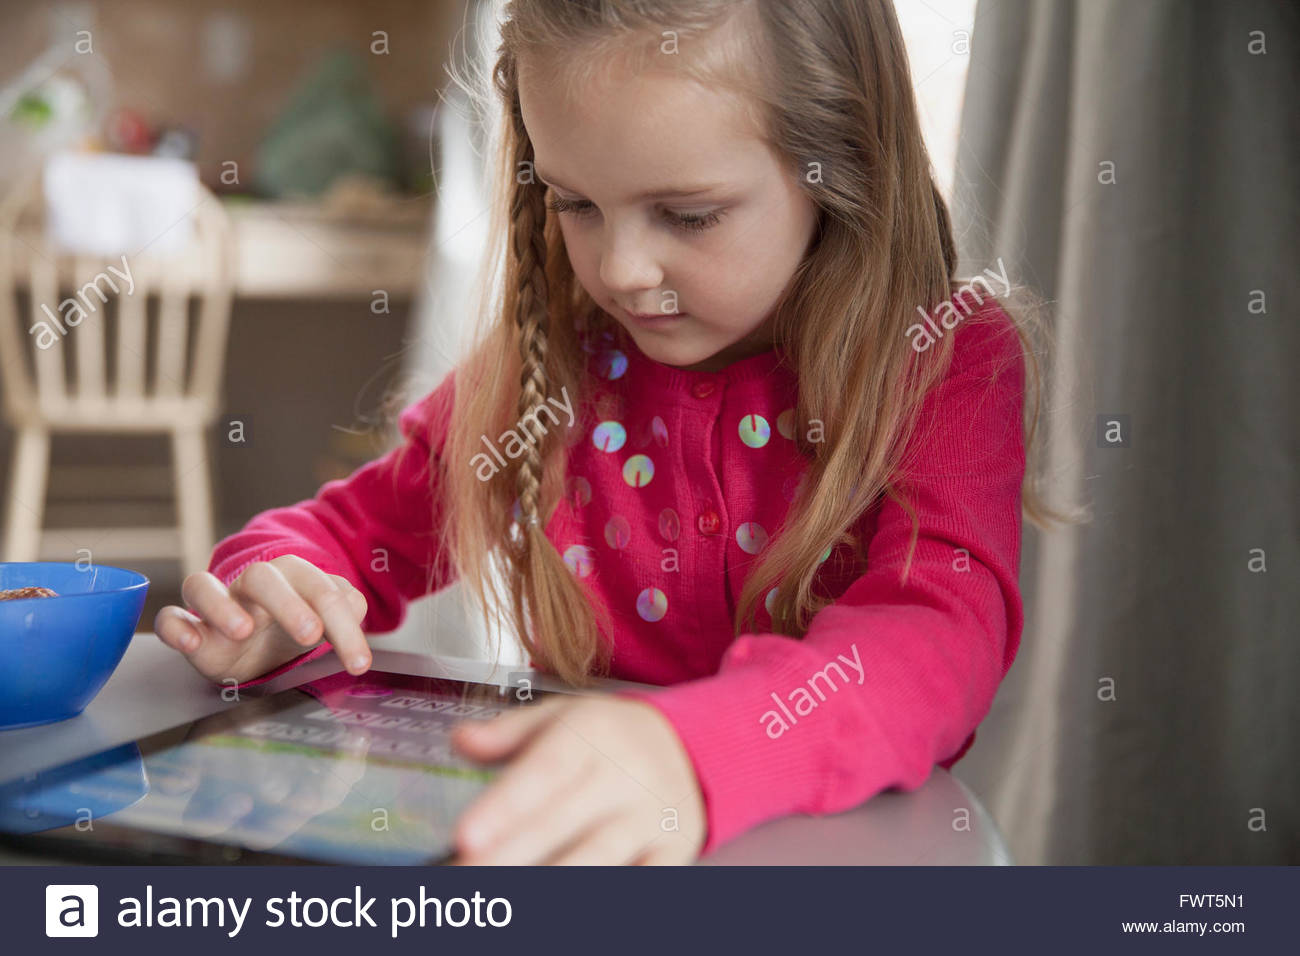 Cute young girl using digital tablet at table Stock Photo